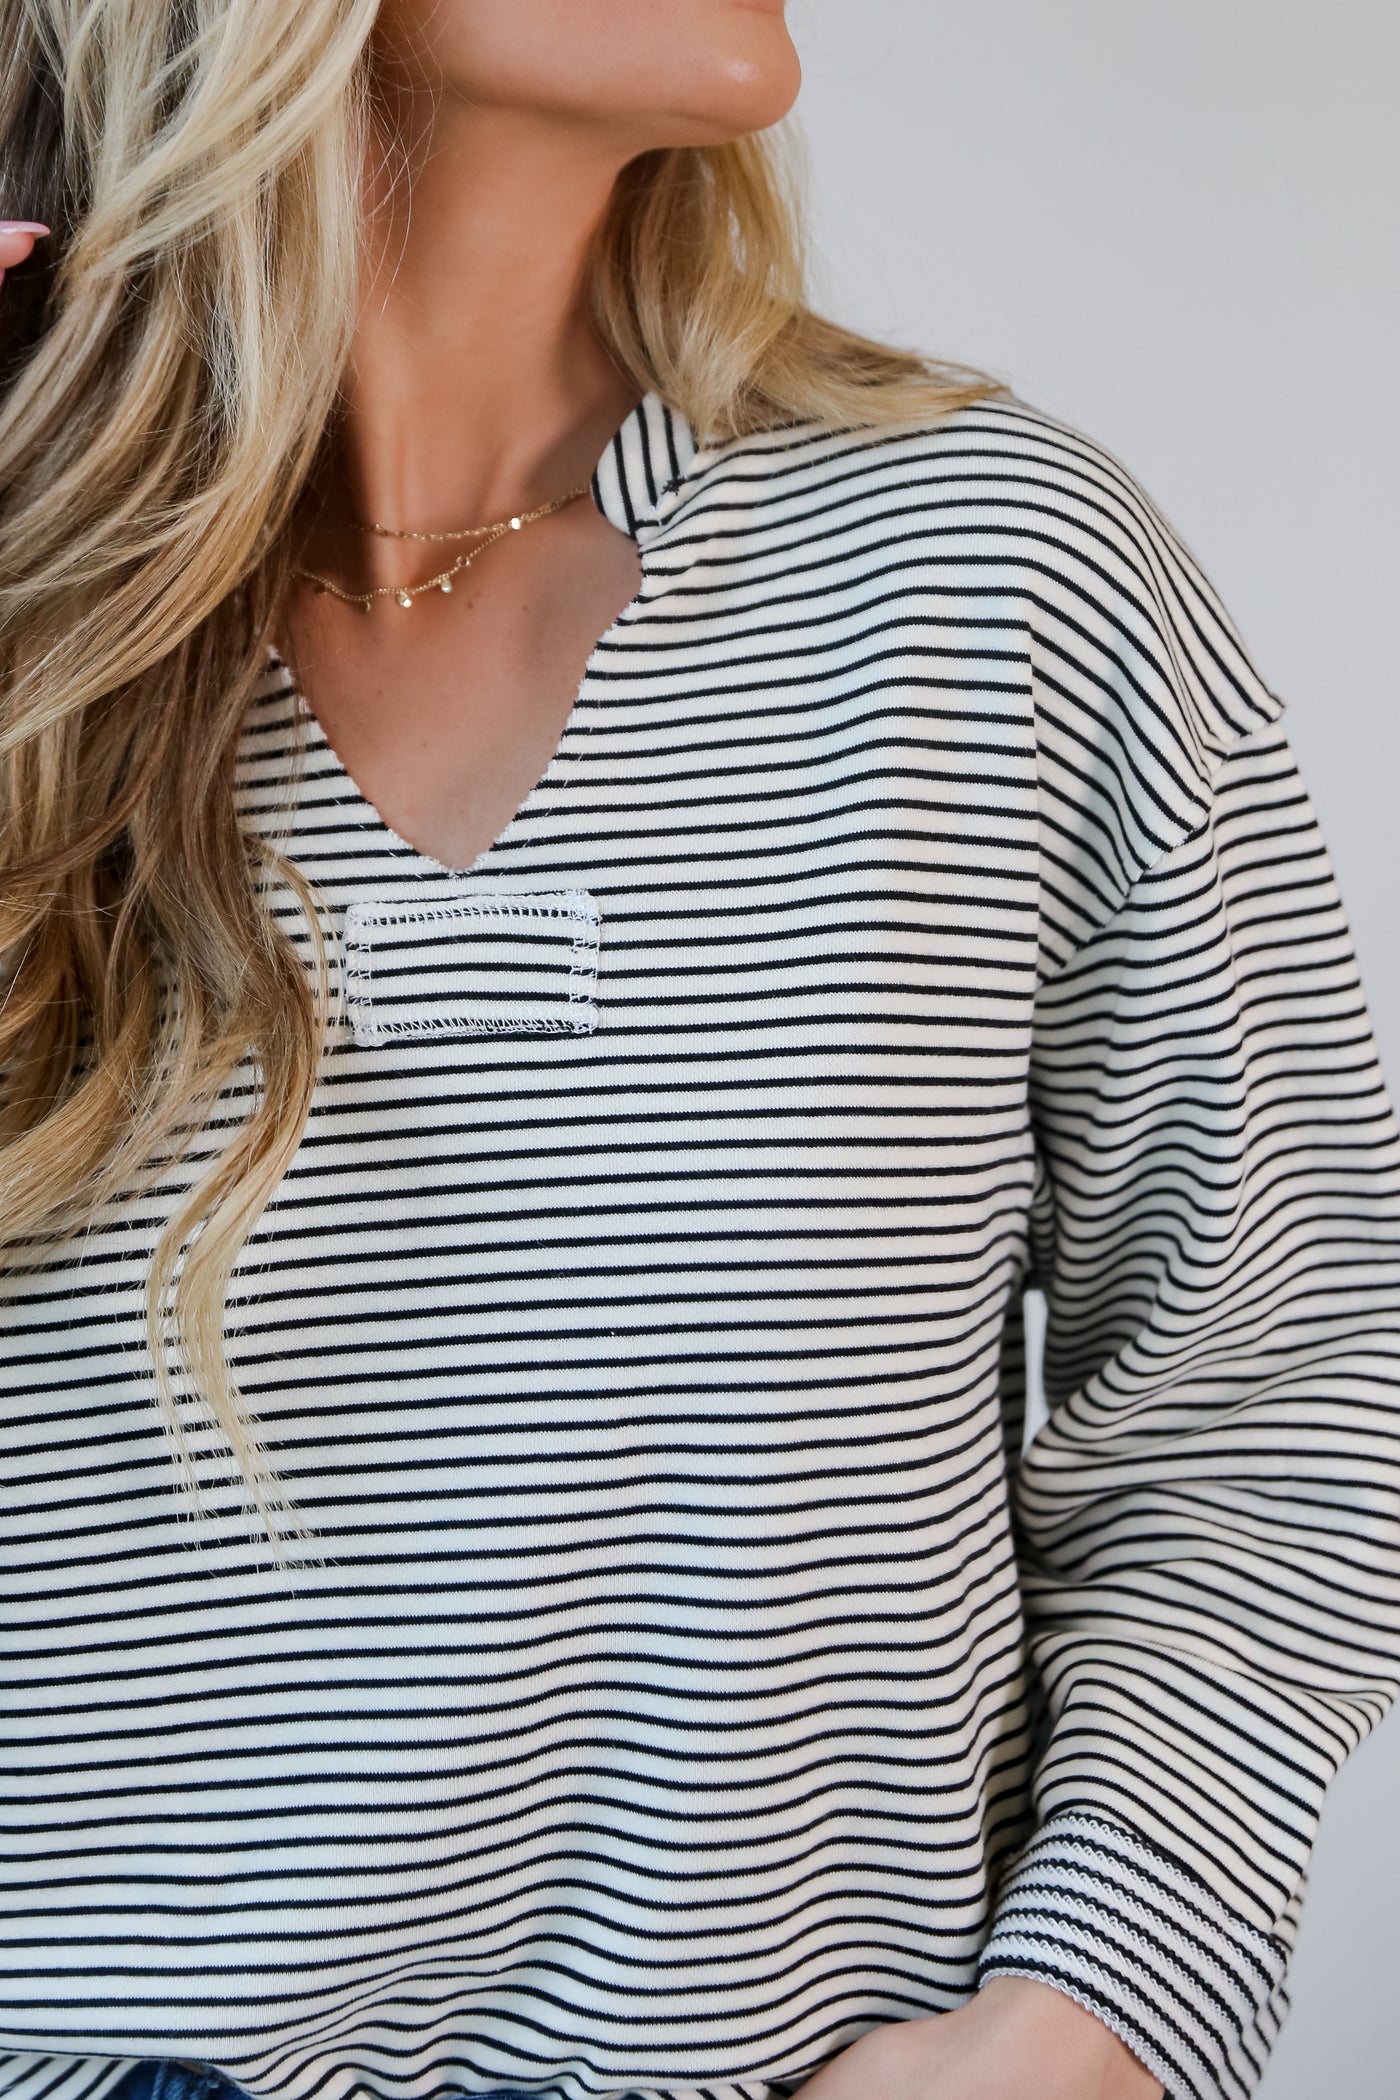 White Striped Knit Top close up